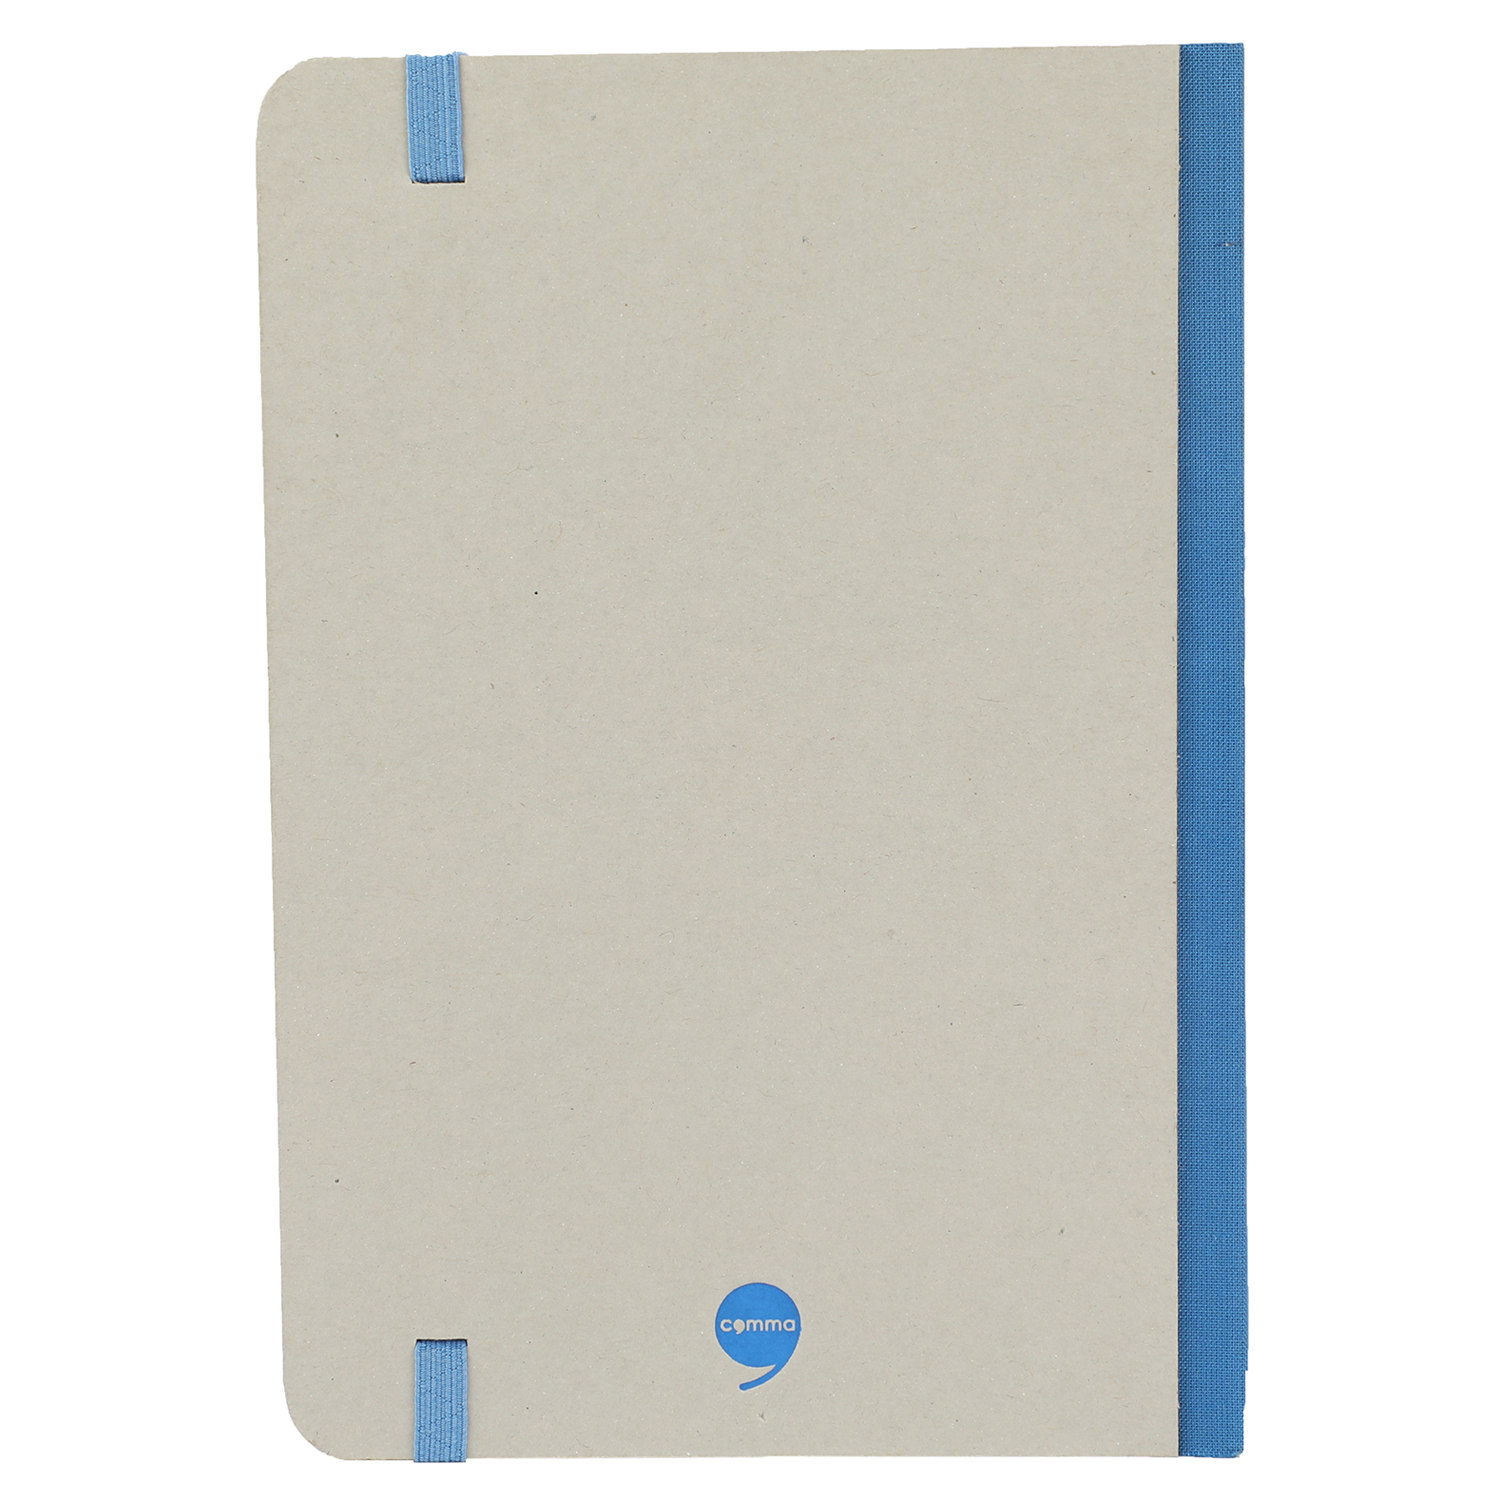 Comma Ecologique - A5 Size - Hard Bound Notebook (Grey with Blue)